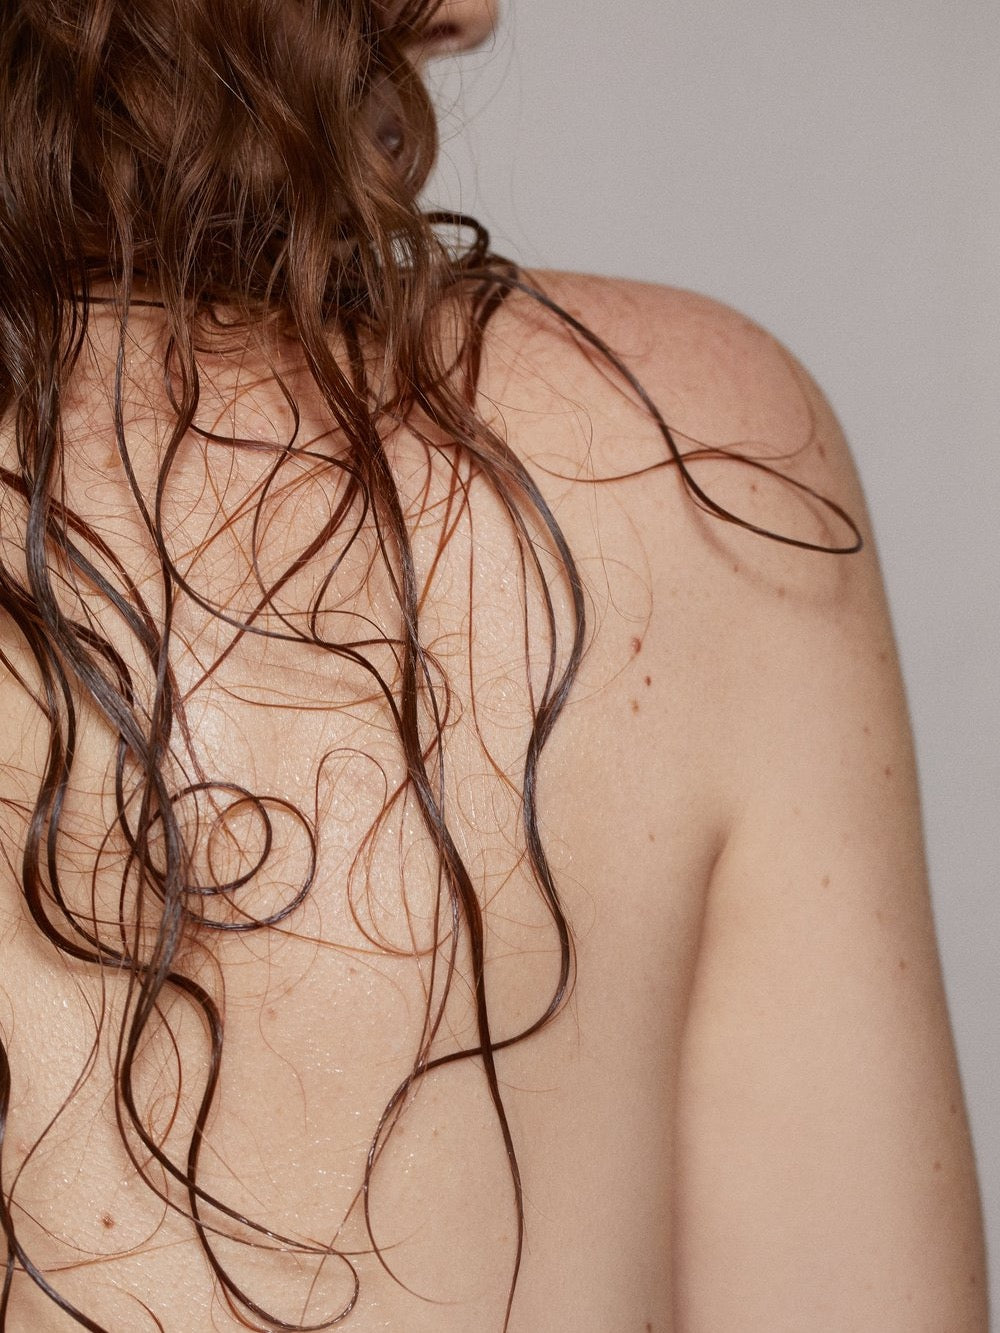 The back of a woman with long curly hair, sprayed with NOTO&#39;s Basil Yarrow Mist.